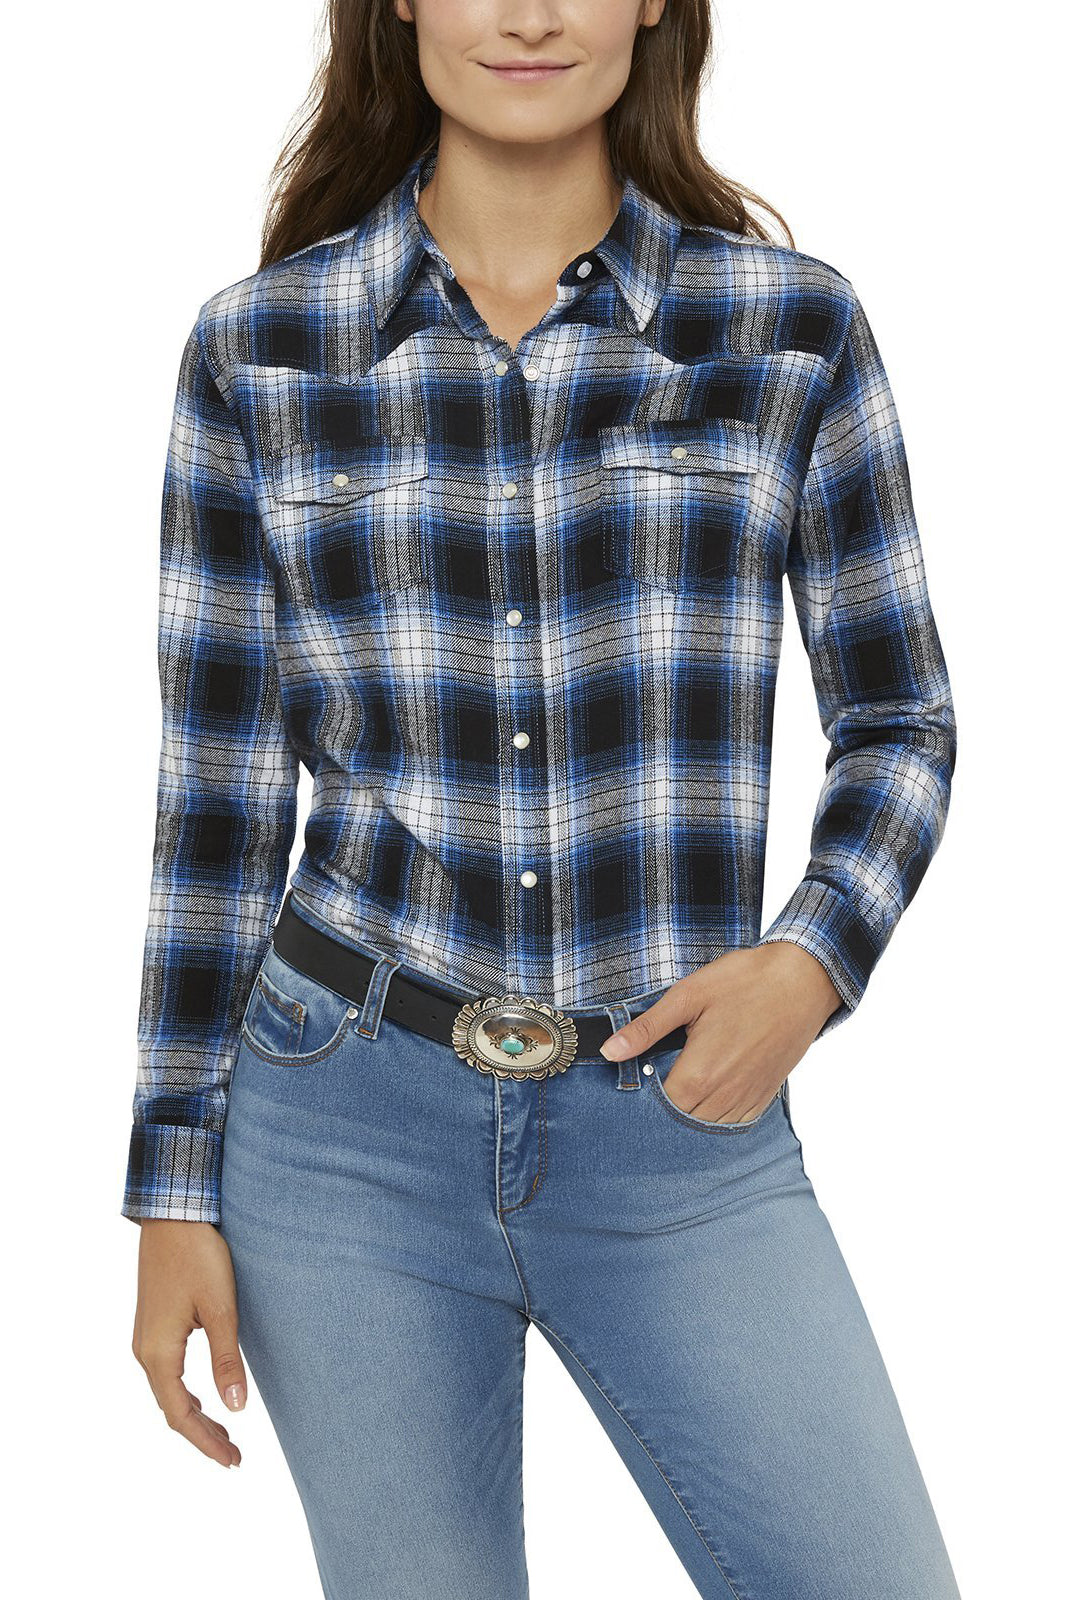 cowgirl flannel shirts